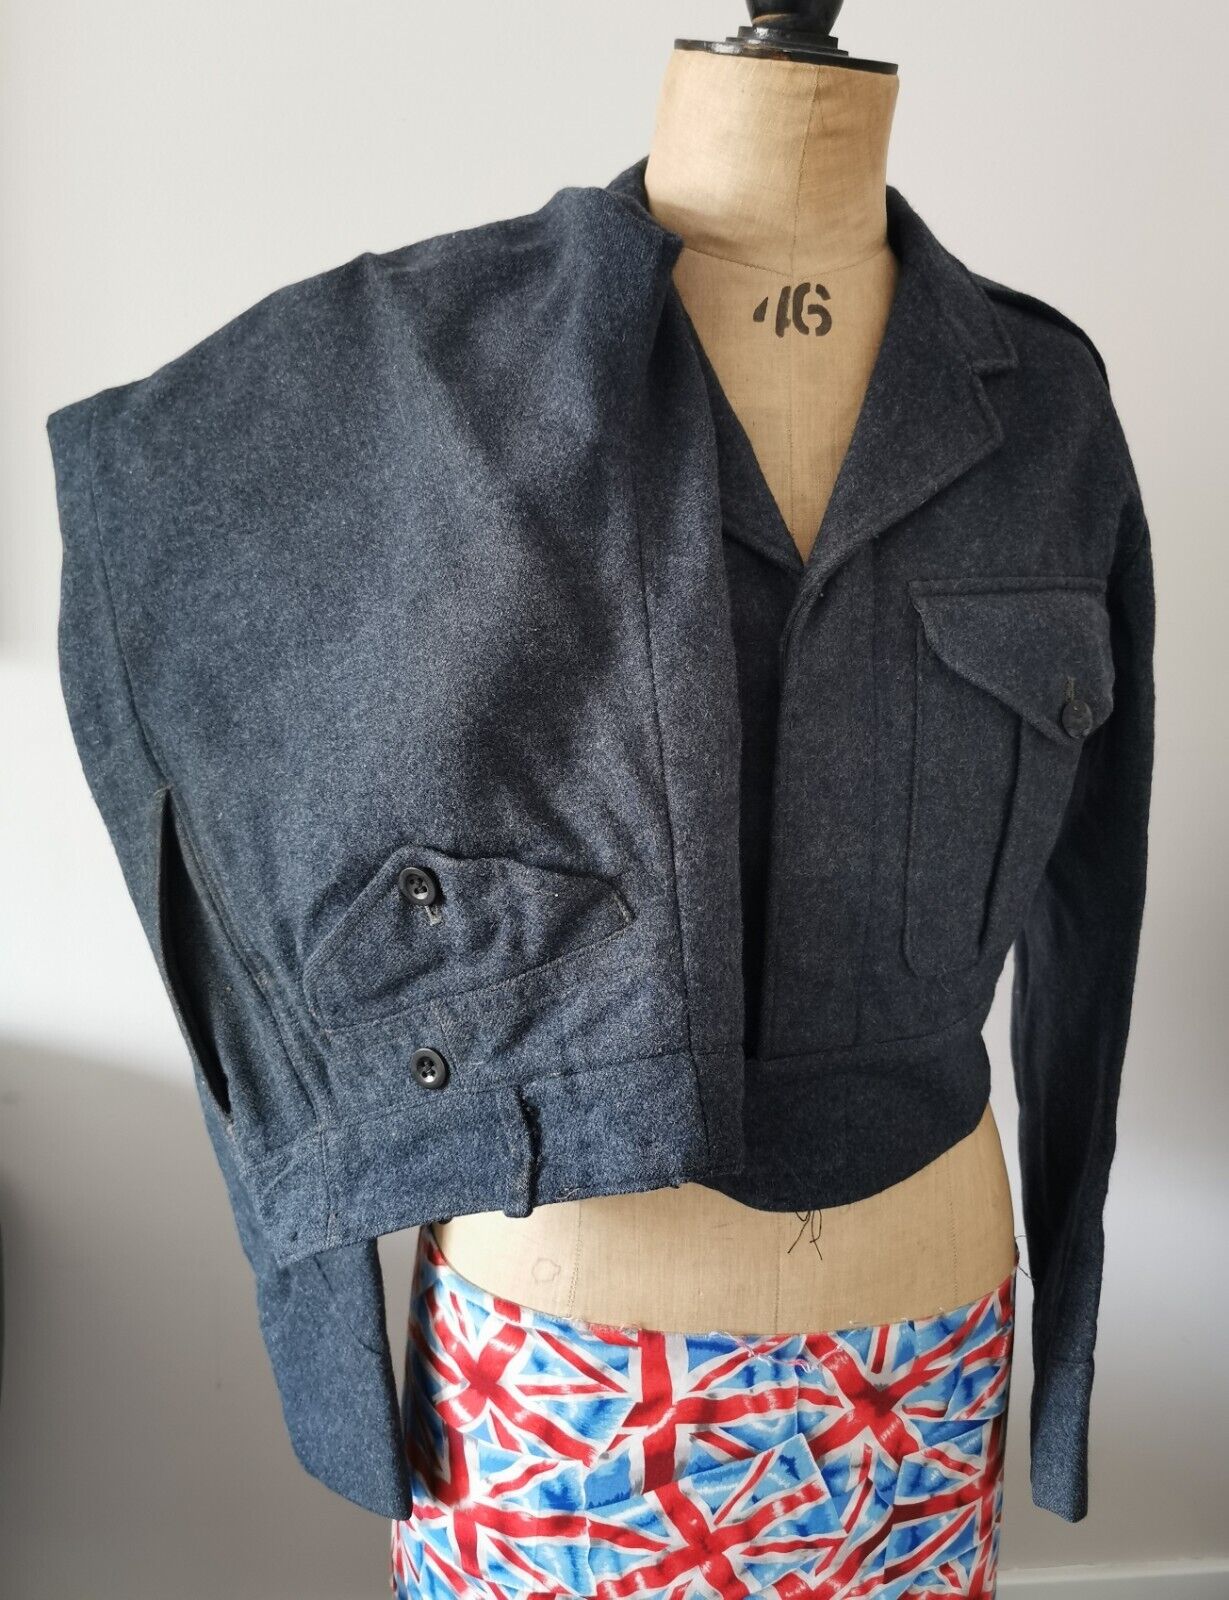 1952 Royal Air Force RAF Issued Blouse No 2 Home Dress Size 10 Including Trouser